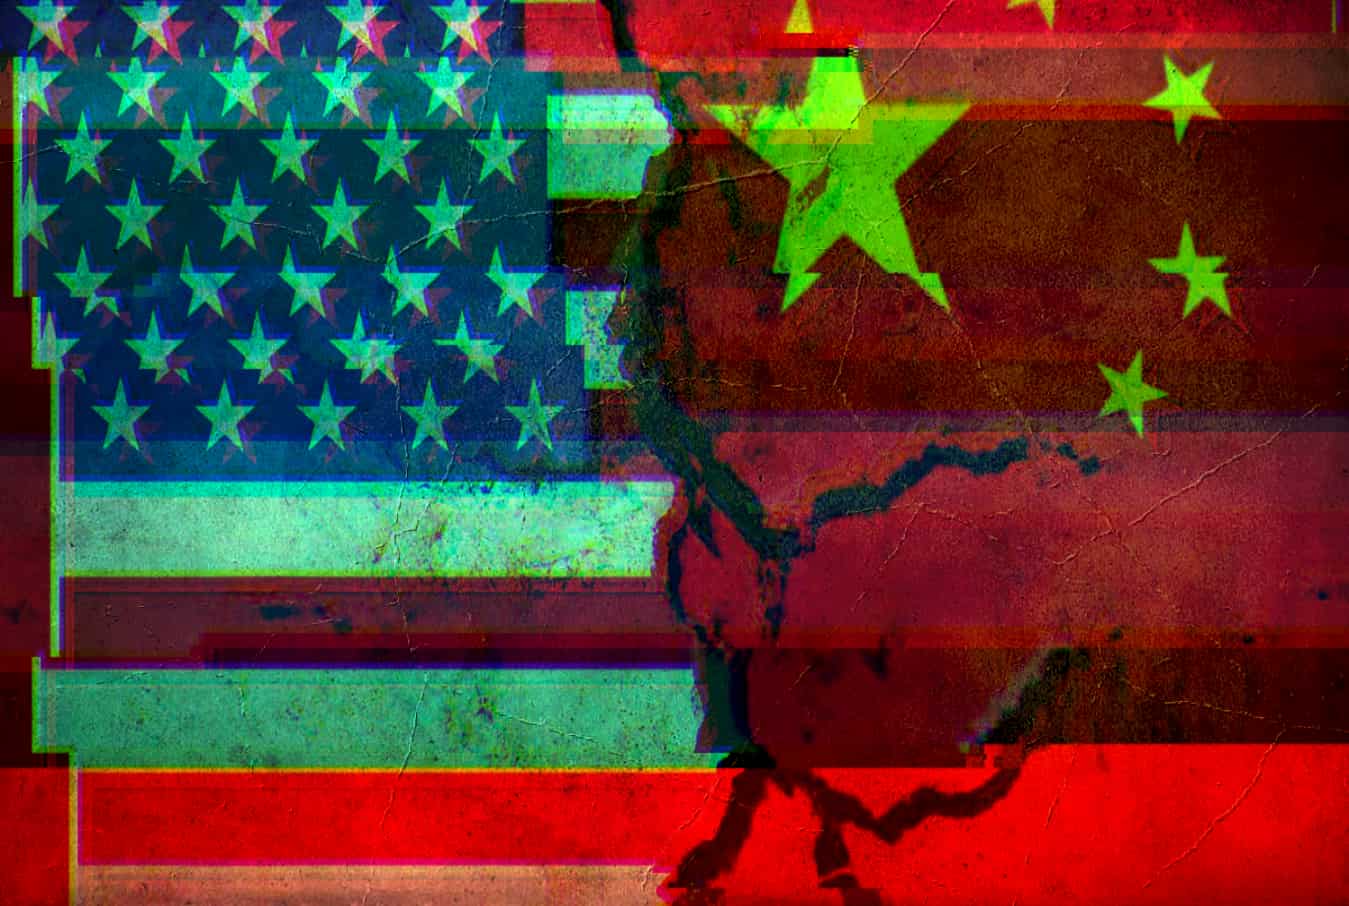 Researchers Reveal CIA’s 11-year Old Hacking Campaign Against China